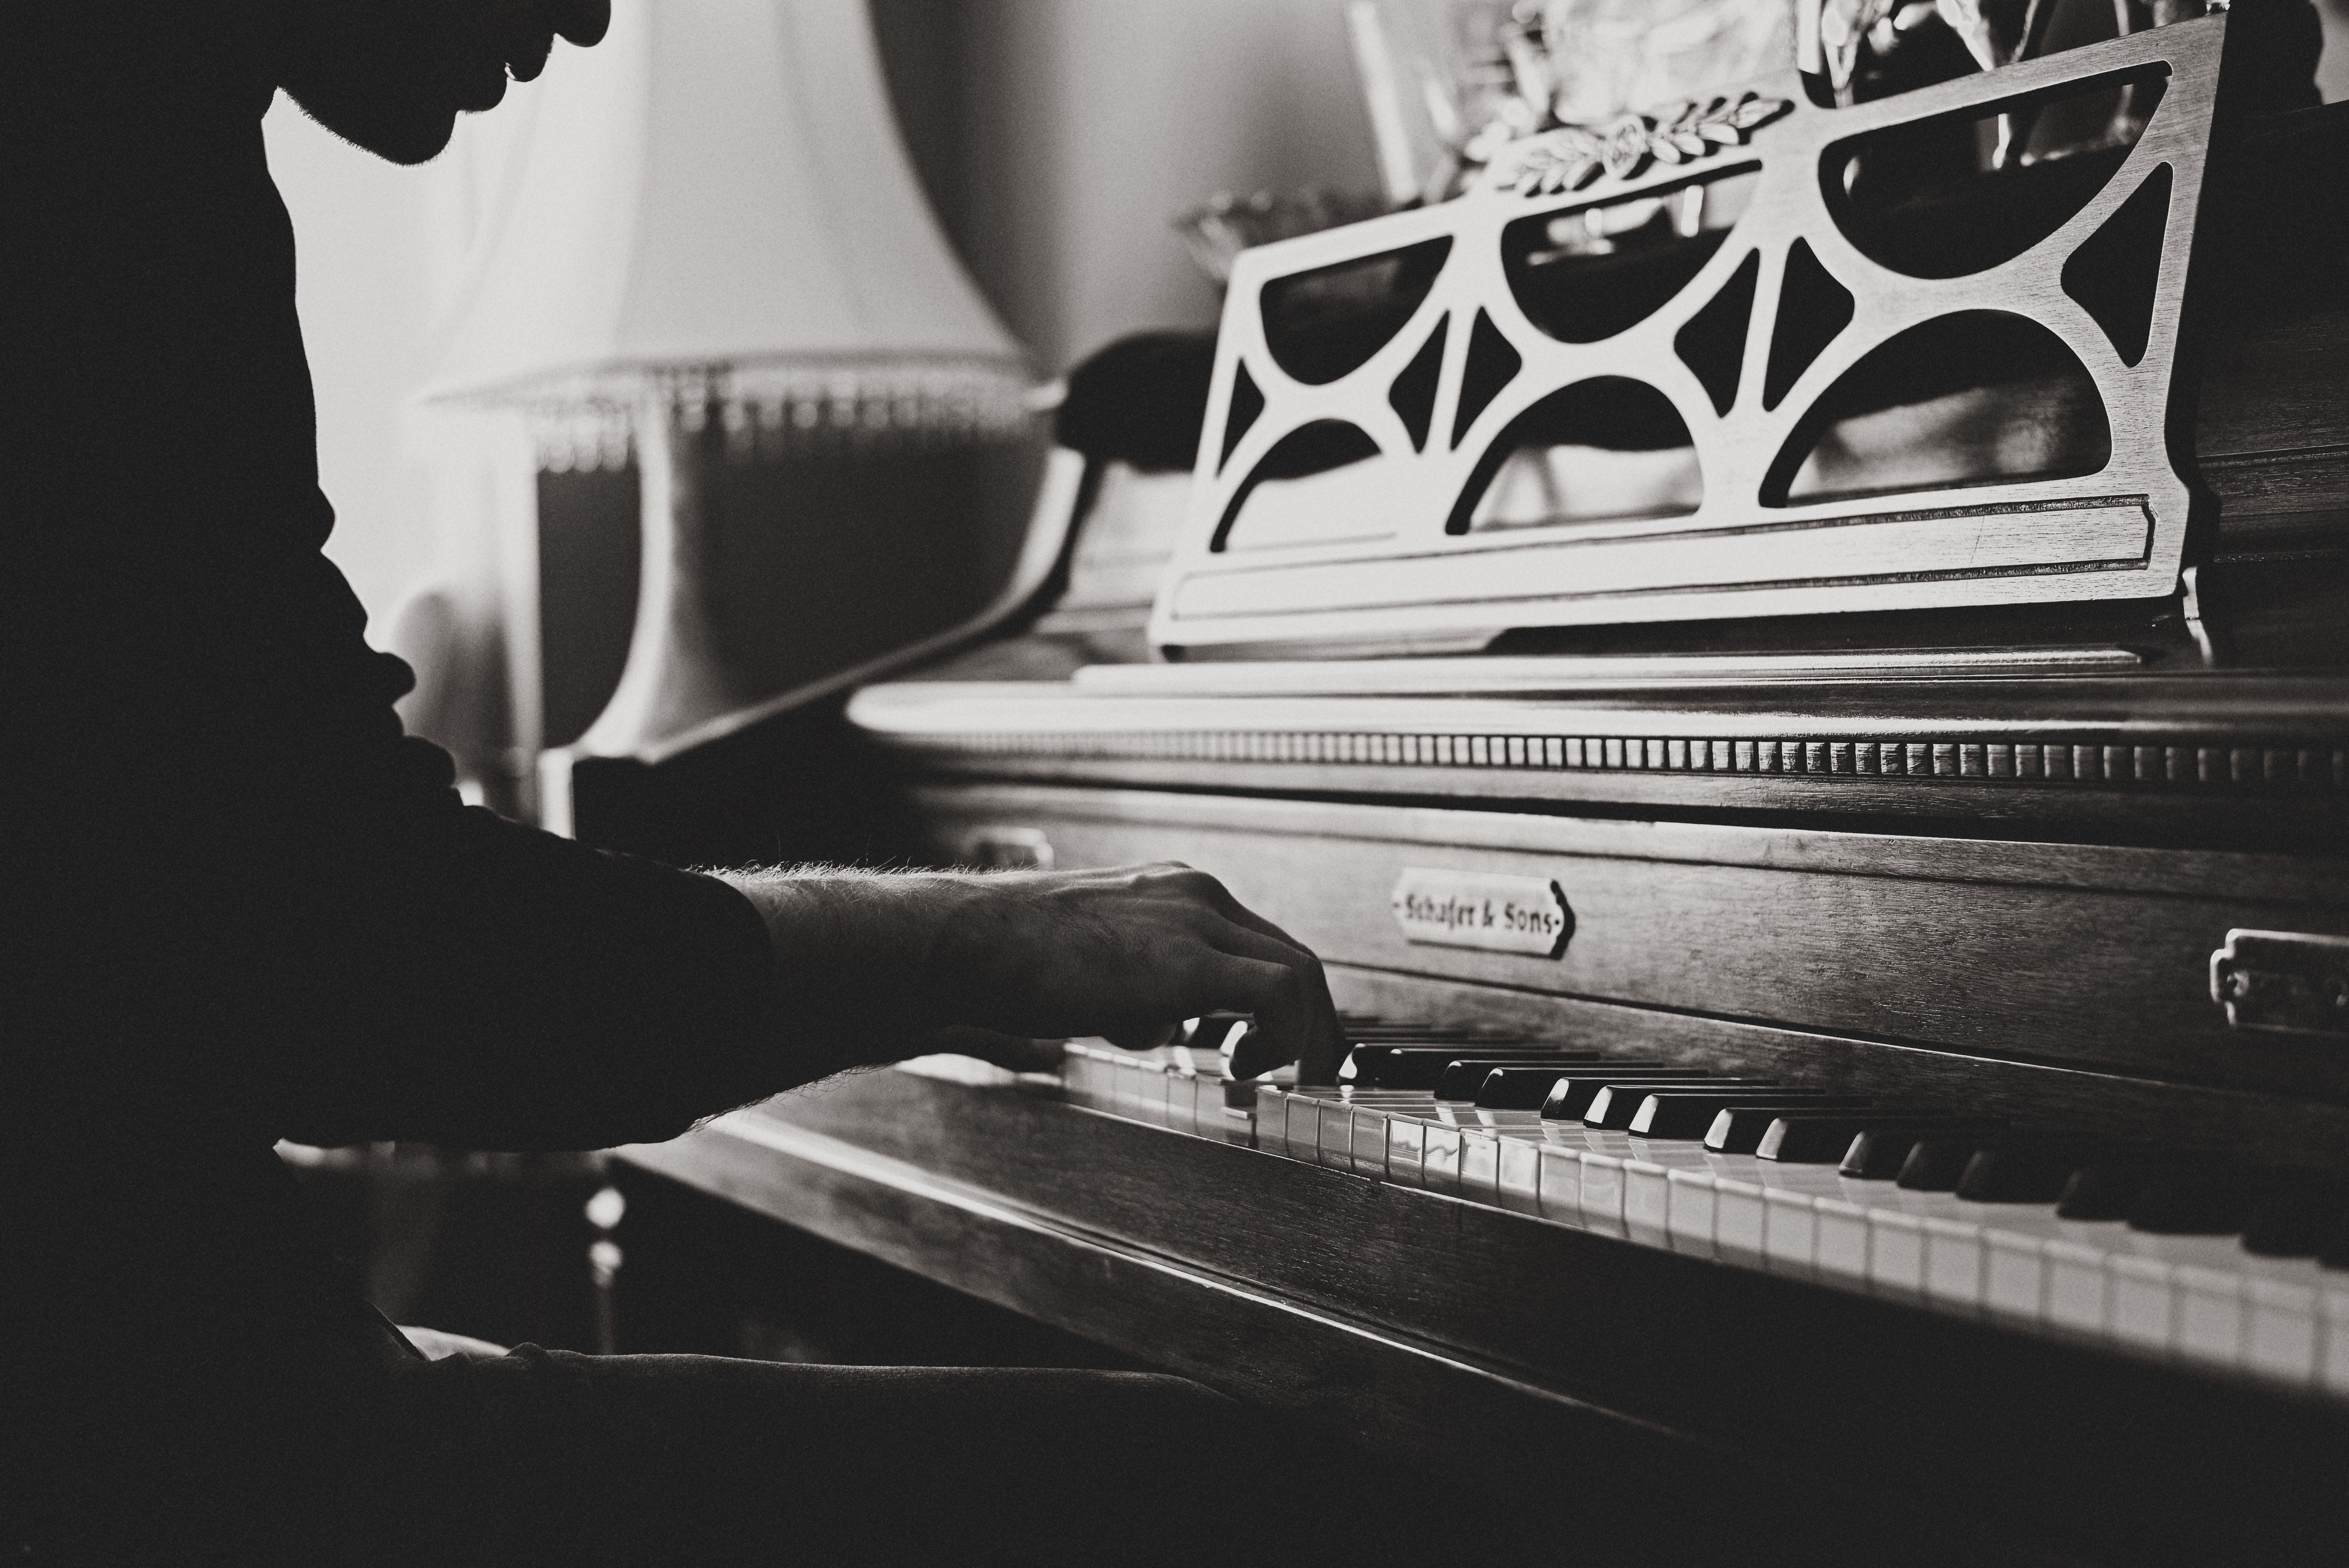 piano, hands, music, vintage, bw, chb cellphone